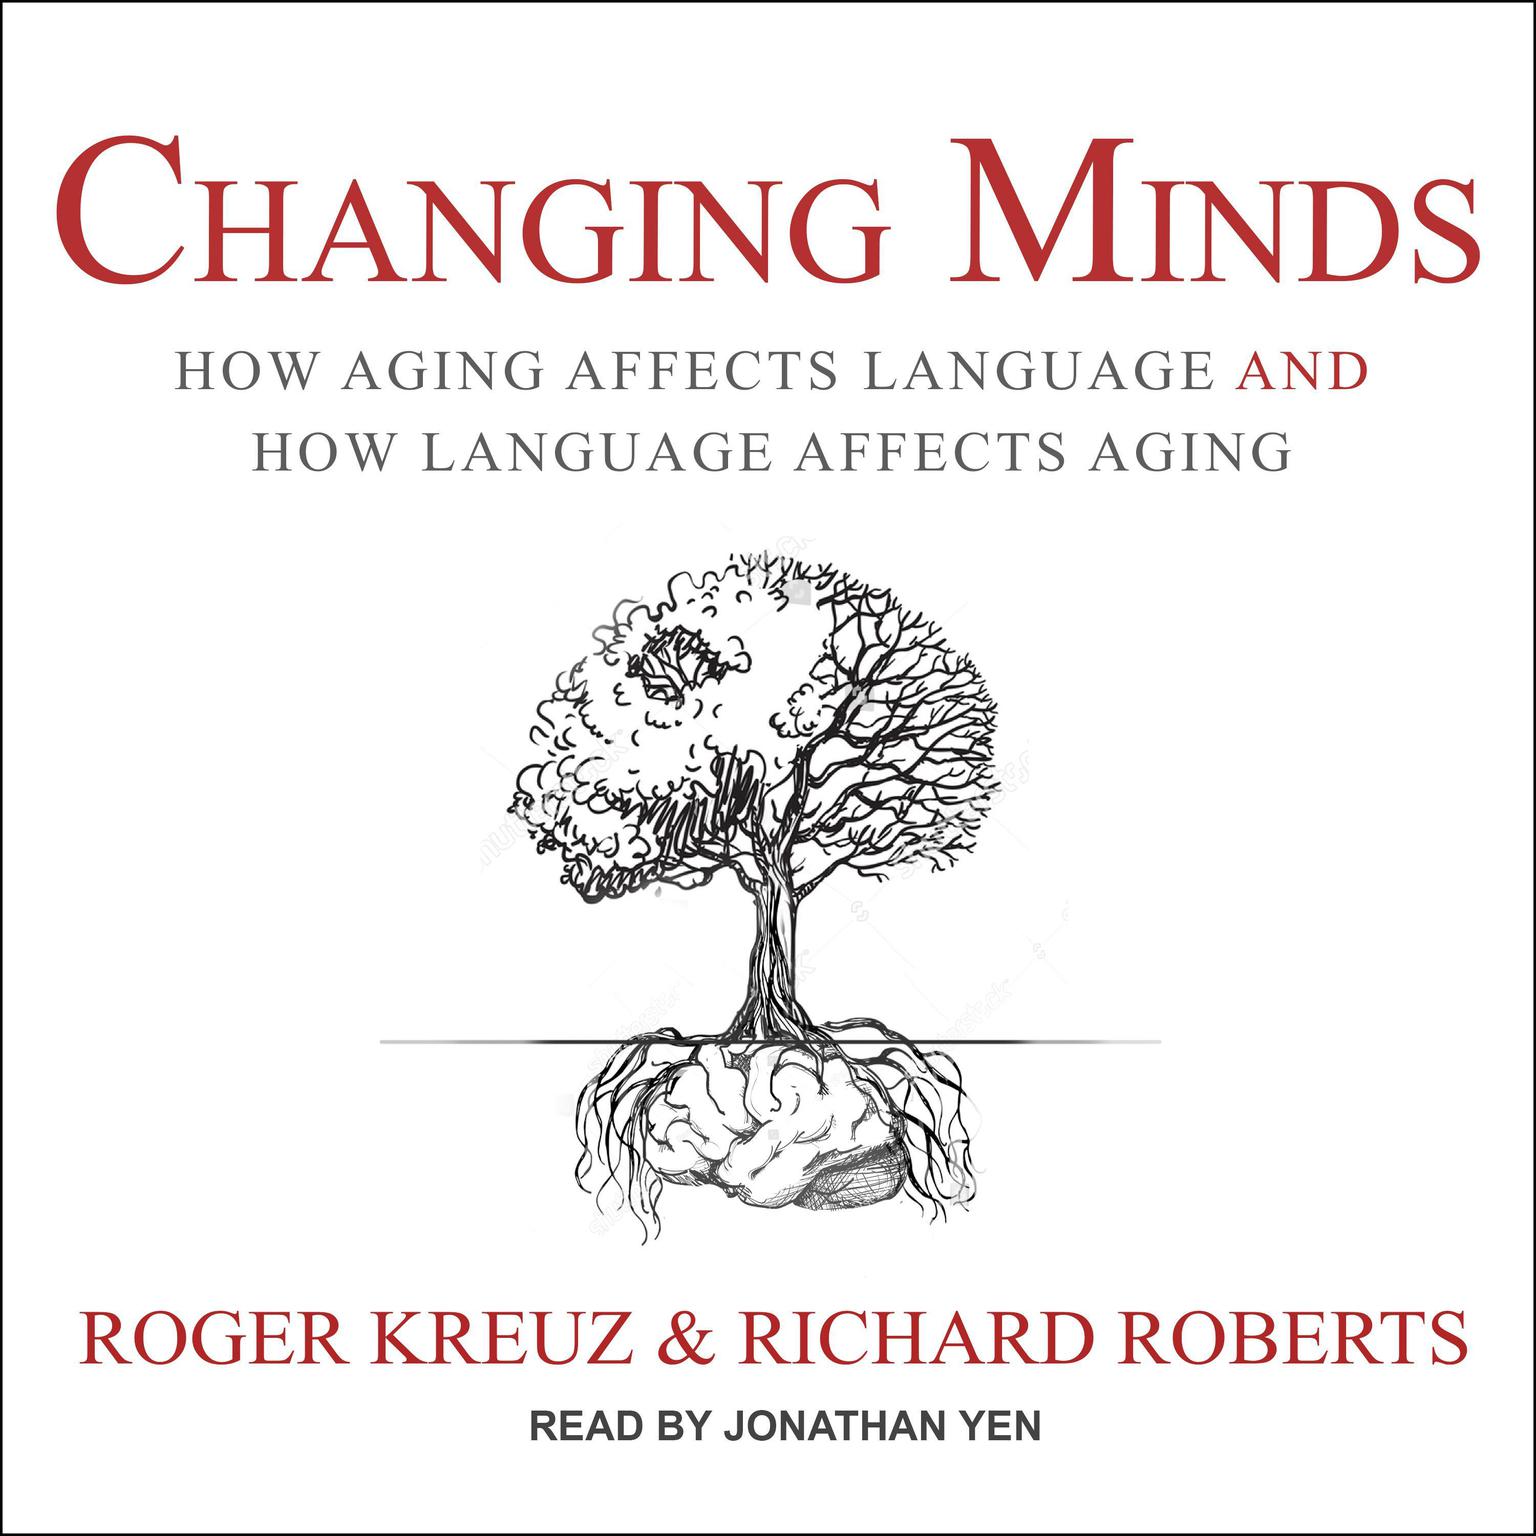 Changing Minds: How Aging Affects Language and How Language Affects Aging Audiobook, by Richard Roberts